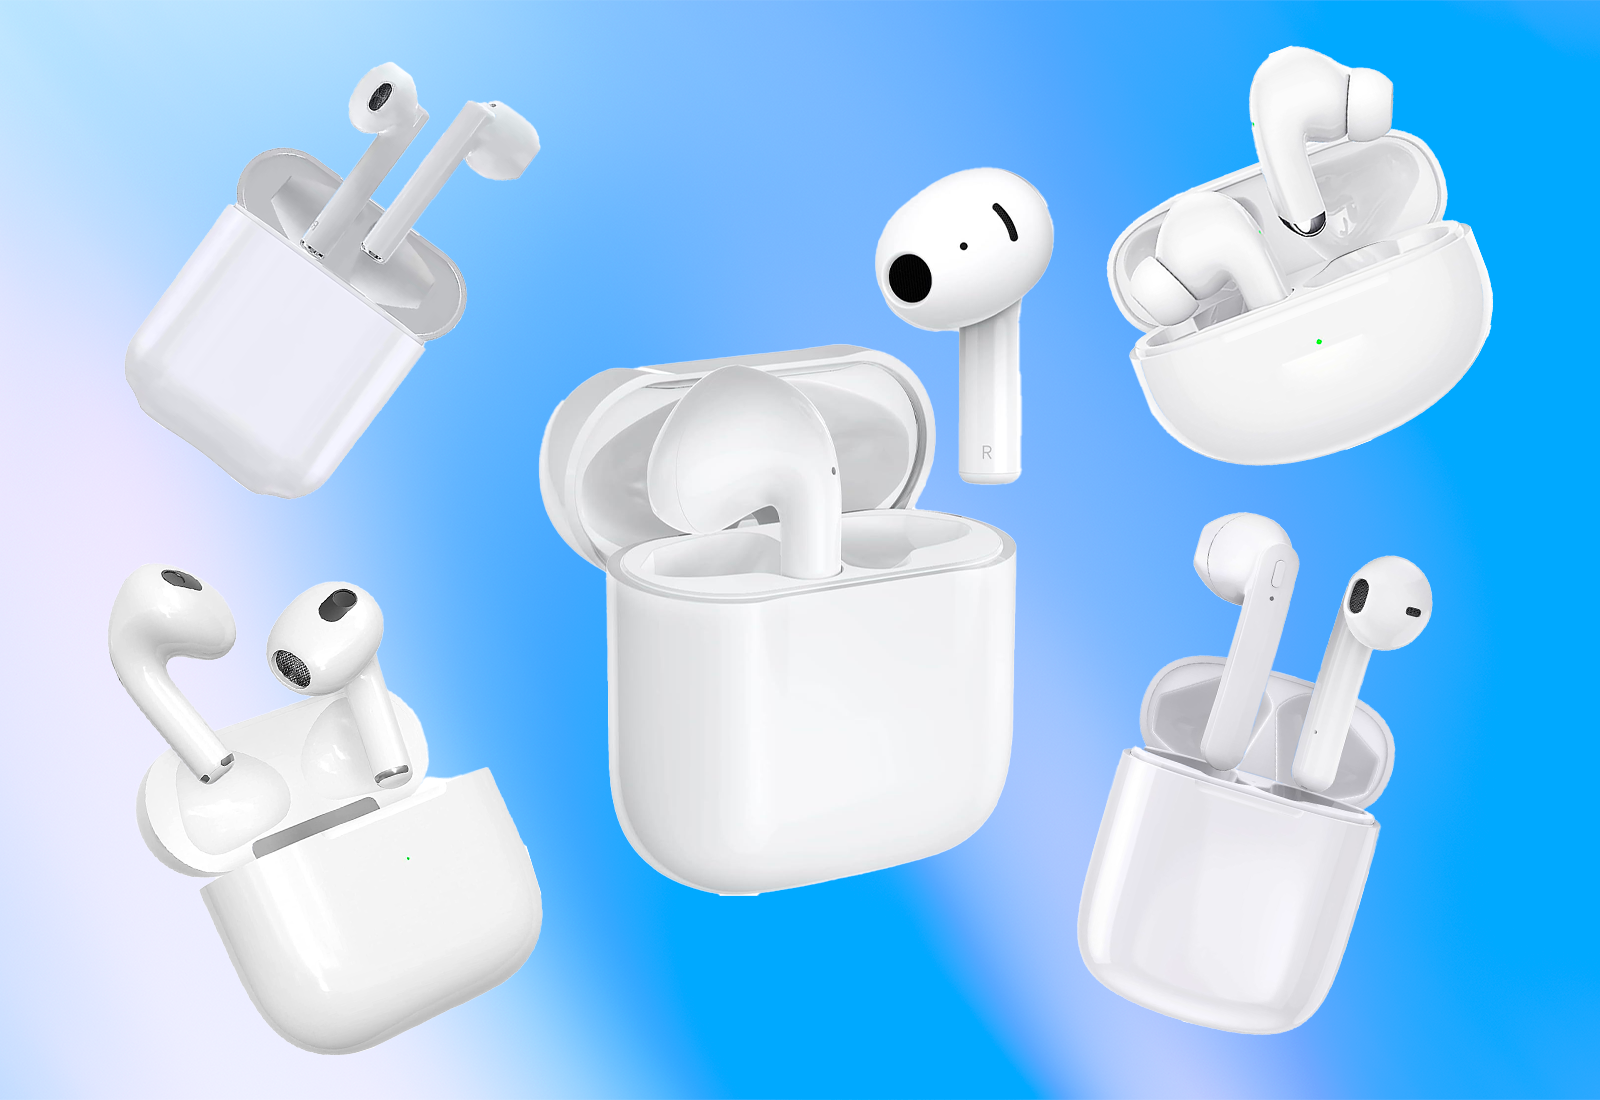 For anyone looking to buy the USB-C version of Apple EarPods : r/apple